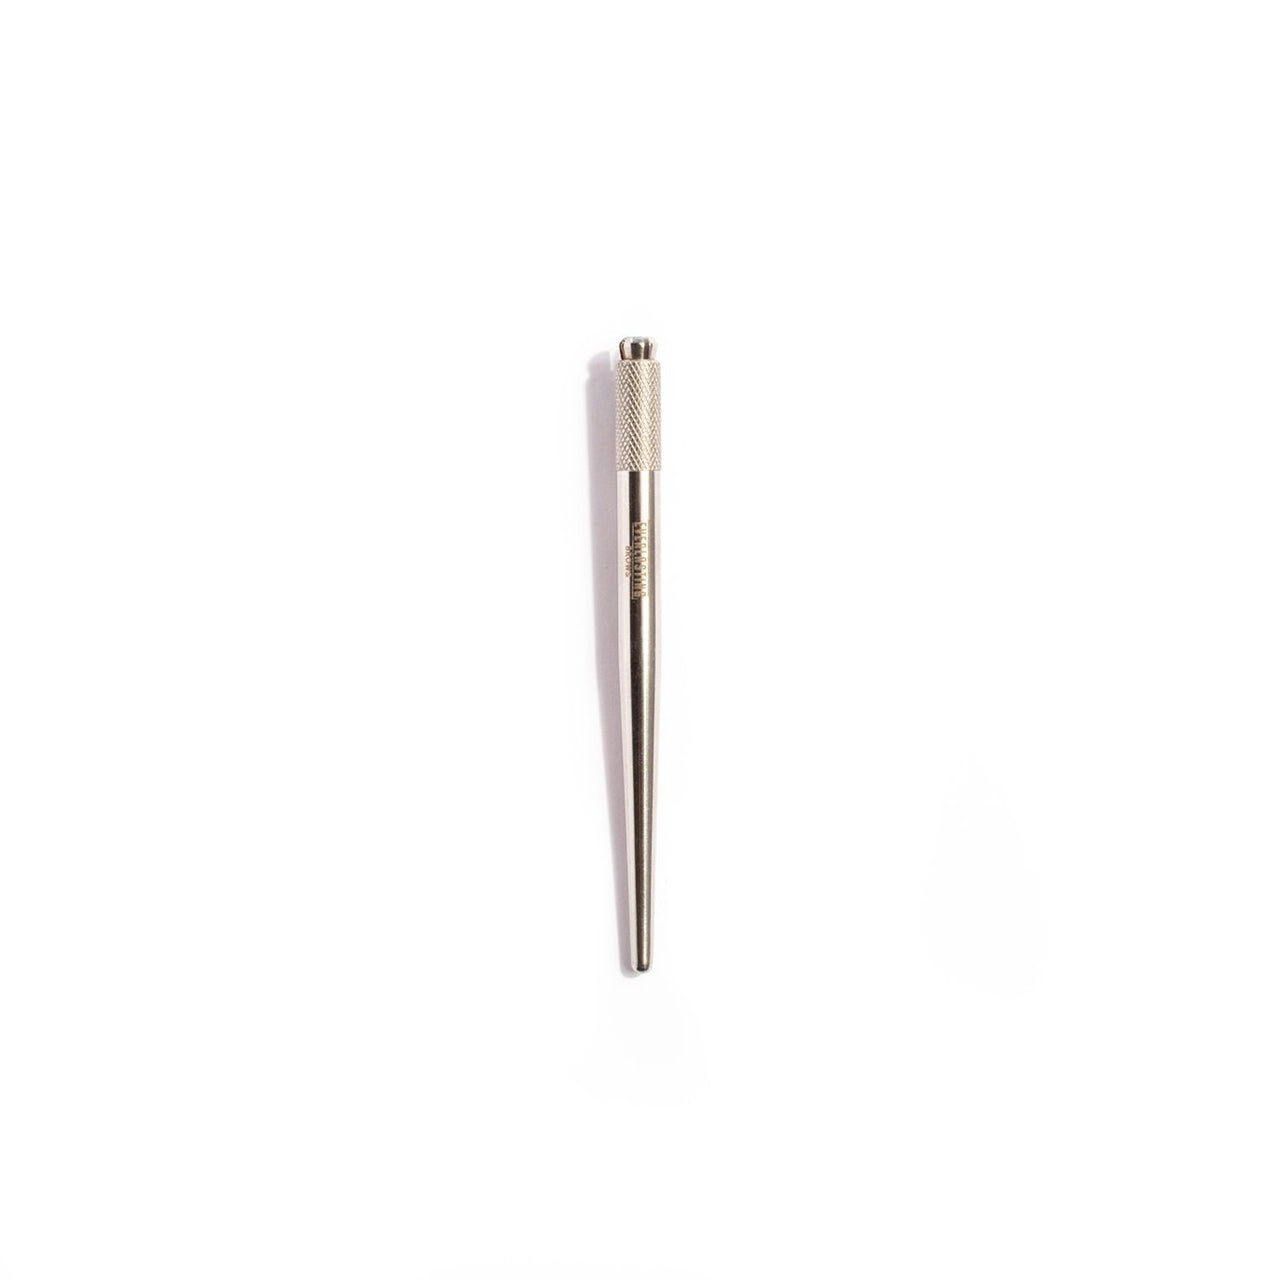 My Absolute Beauty- Stainless Steel Microblading Tool